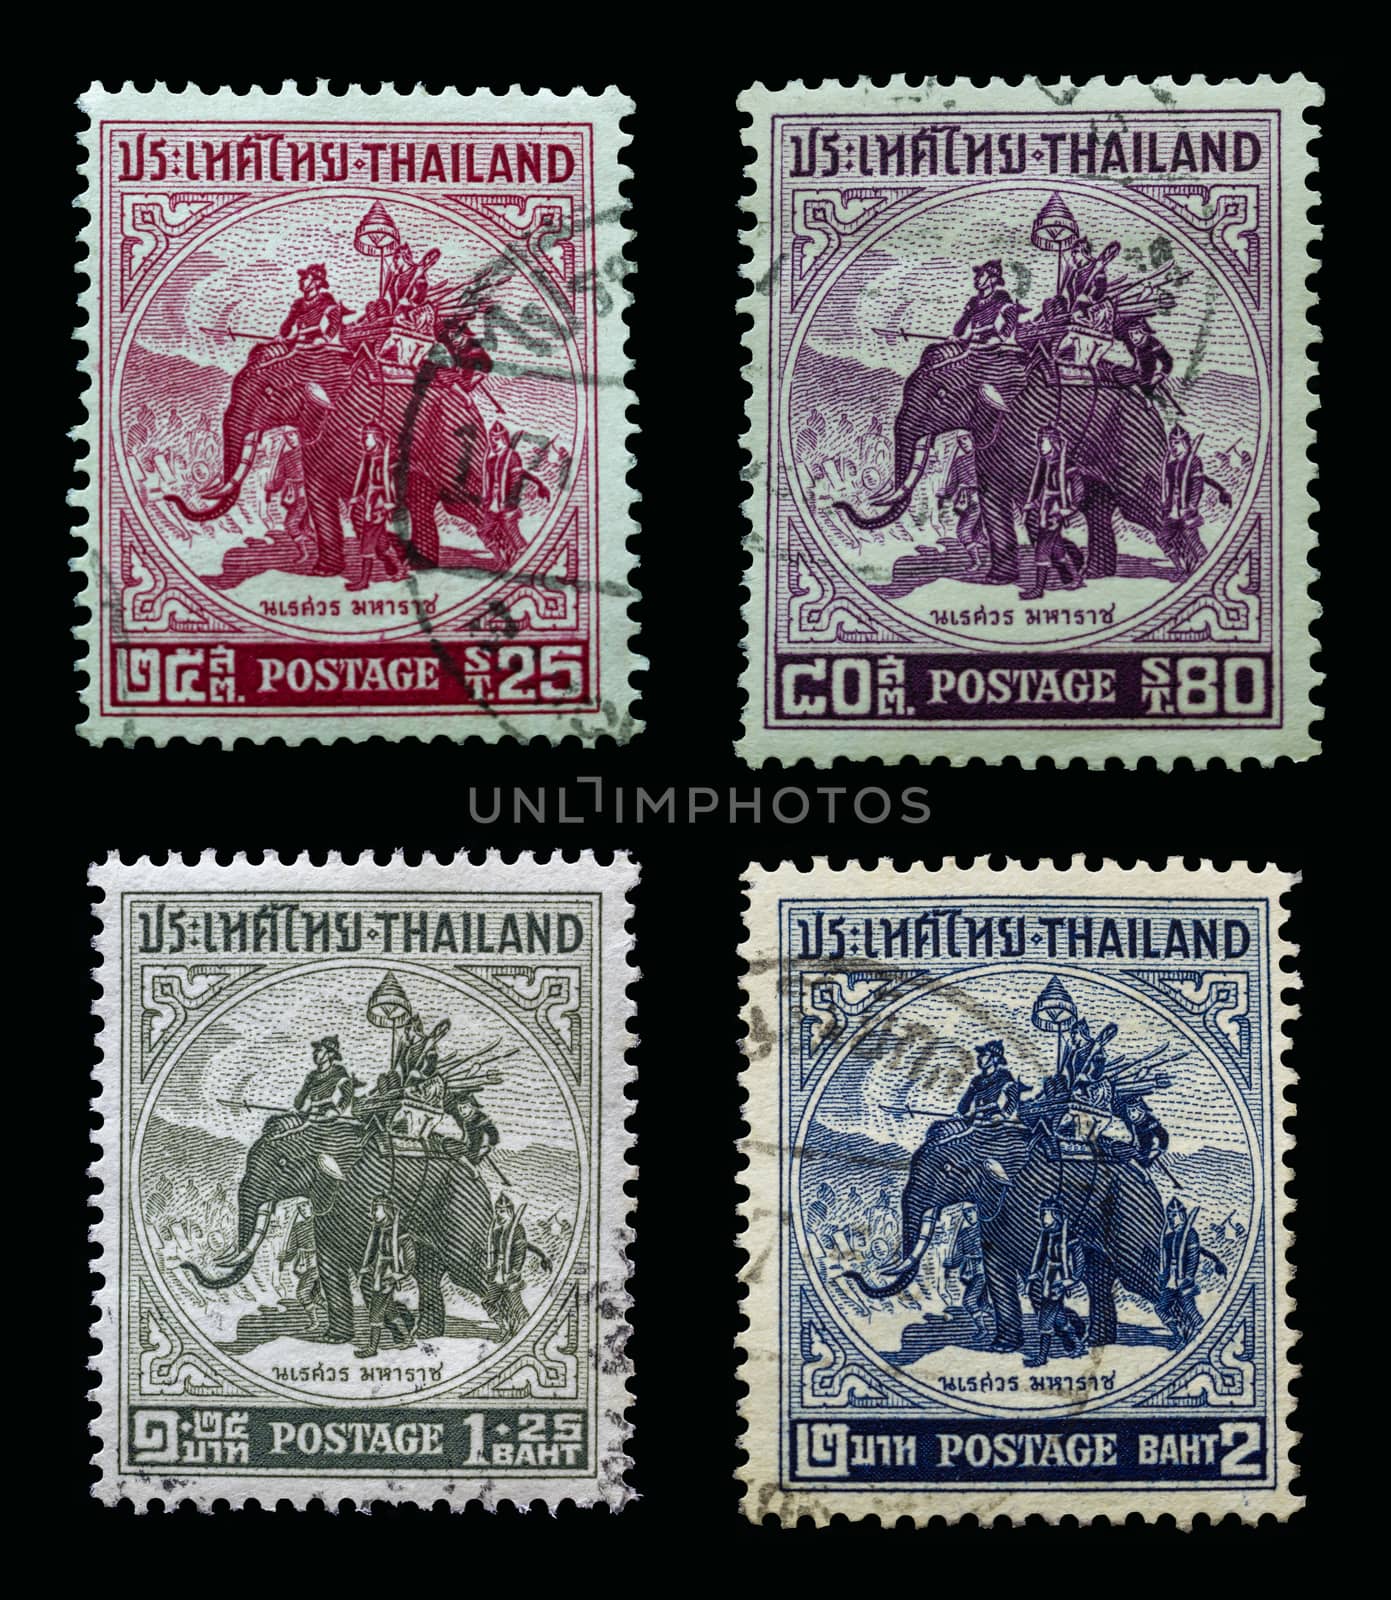 THAILAND - CIRCA 1955: set of Old Stamp Features Thai King Naresuan (1590-1605) Riding On Elephant Sword Handle From The Series "King Naresuan", Thailand, Circa 1955.